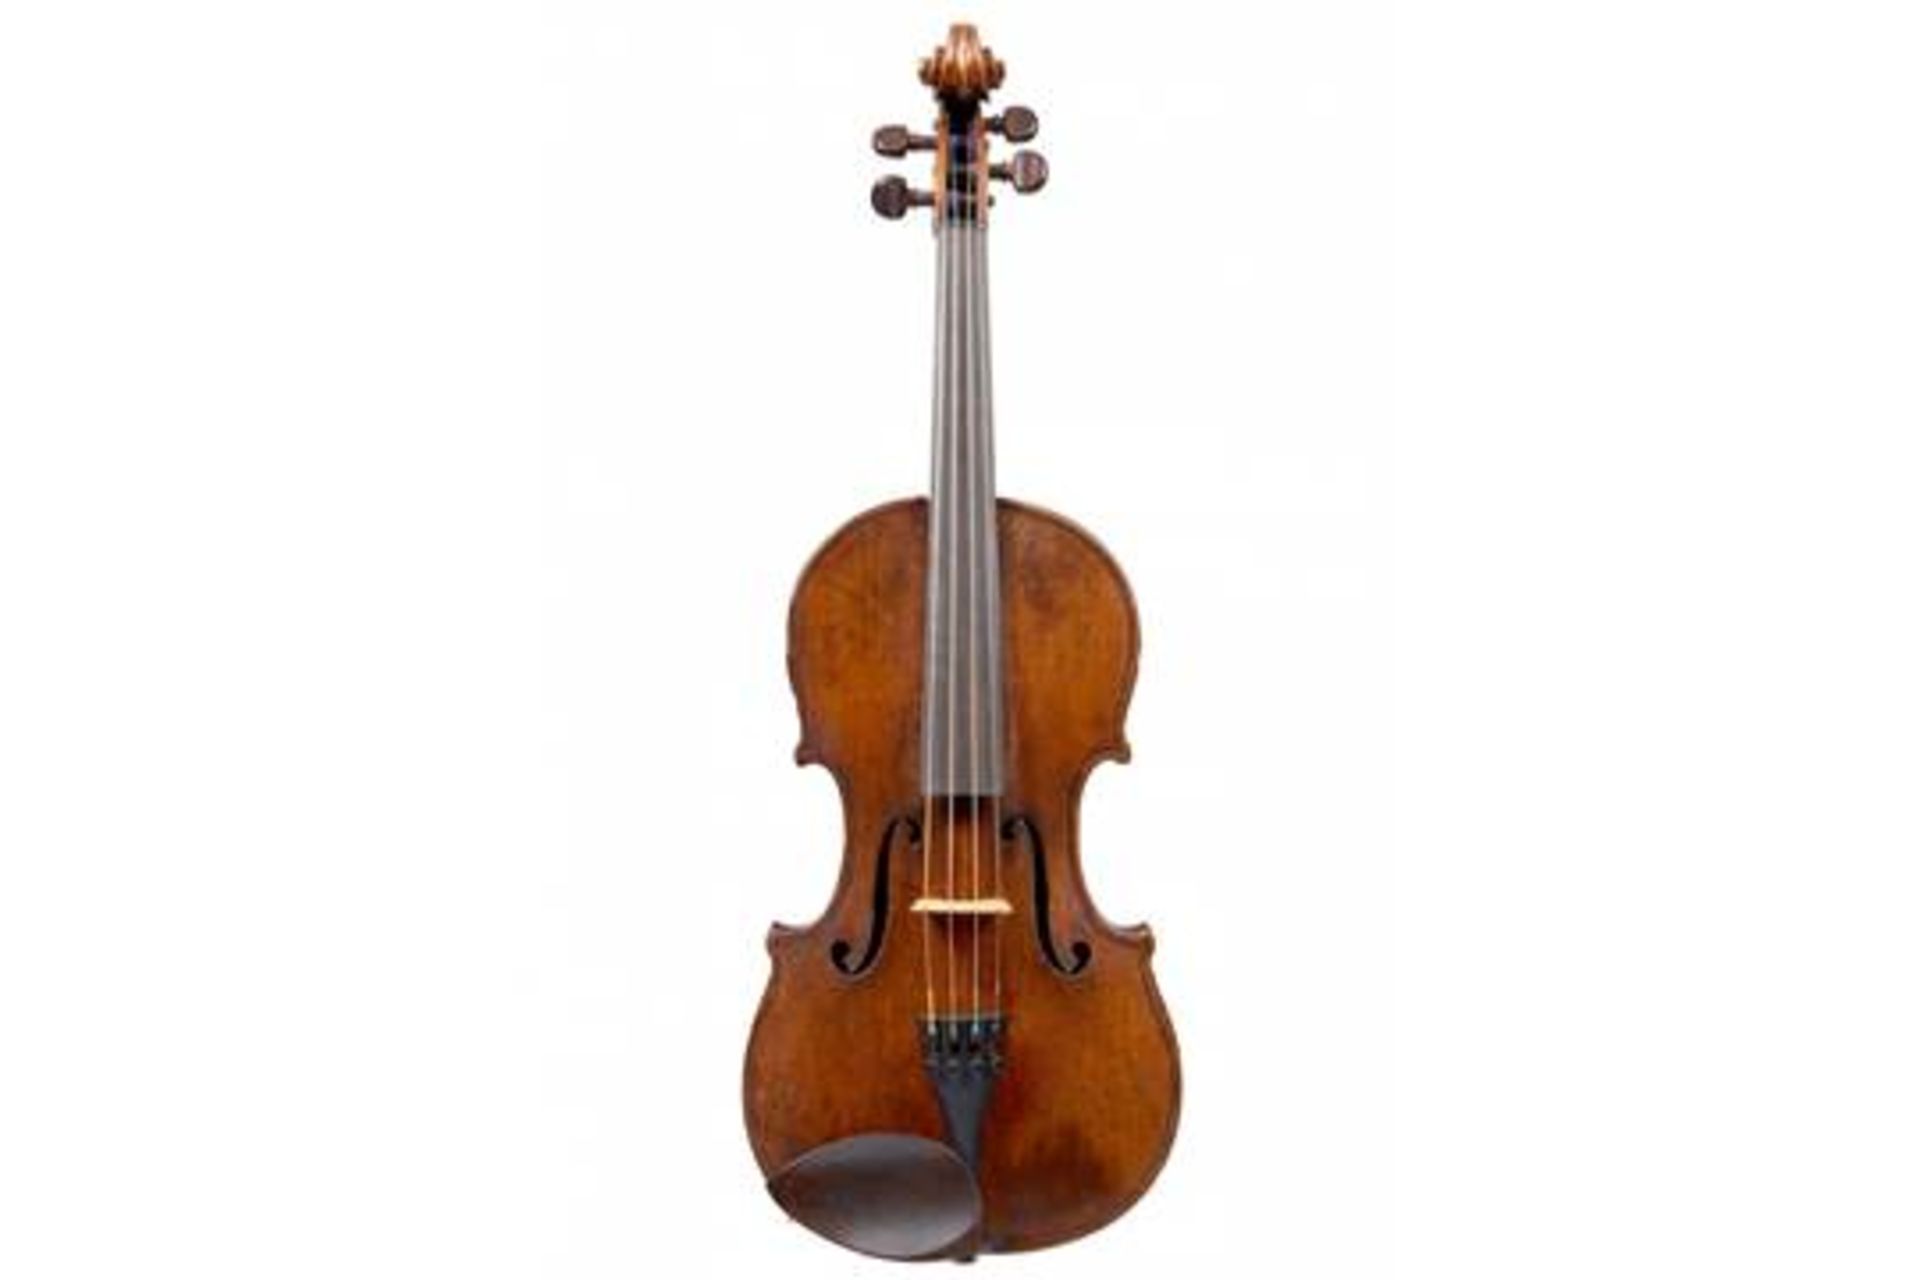 An Italian Violin. Provincial, late 18th Century. Minor repairs to back and table, not post or